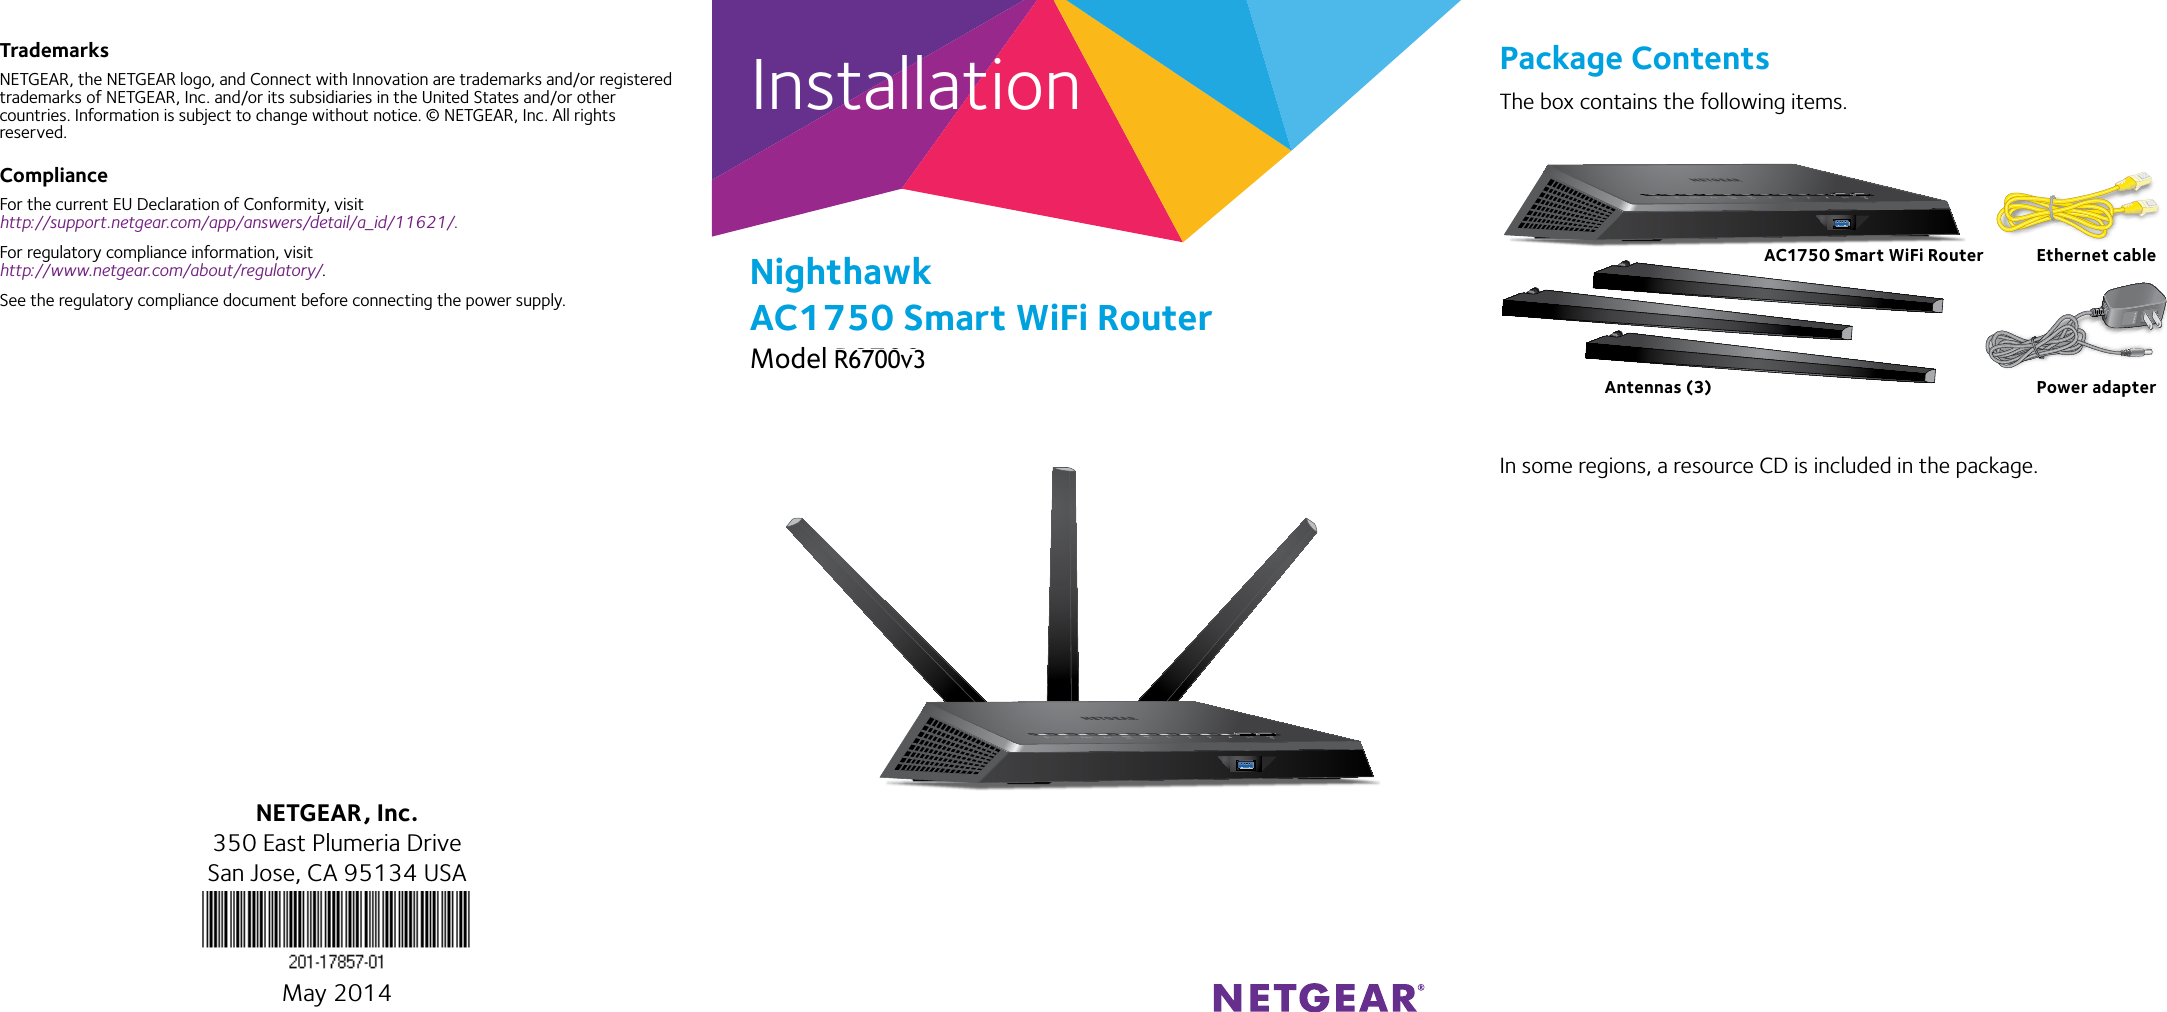 InstallationNighthawk AC1750 Smart WiFi RouterModel R6700TrademarksNETGEAR, the NETGEAR logo, and Connect with Innovation are trademarks and/or registered trademarks of NETGEAR, Inc. and/or its subsidiaries in the United States and/or other countries. Information is subject to change without notice. © NETGEAR, Inc. All rights reserved.ComplianceFor the current EU Declaration of Conformity, visit  http://support.netgear.com/app/answers/detail/a_id/11621/. For regulatory compliance information, visit http://www.netgear.com/about/regulatory/.See the regulatory compliance document before connecting the power supply.Package ContentsThe box contains the following items.In some regions, a resource CD is included in the package.NETGEAR, Inc.350 East Plumeria DriveSan Jose, CA 95134 USAMay 2014AC1750 Smart WiFi Router Ethernet cablePower adapterAntennas (3)R6700v3 